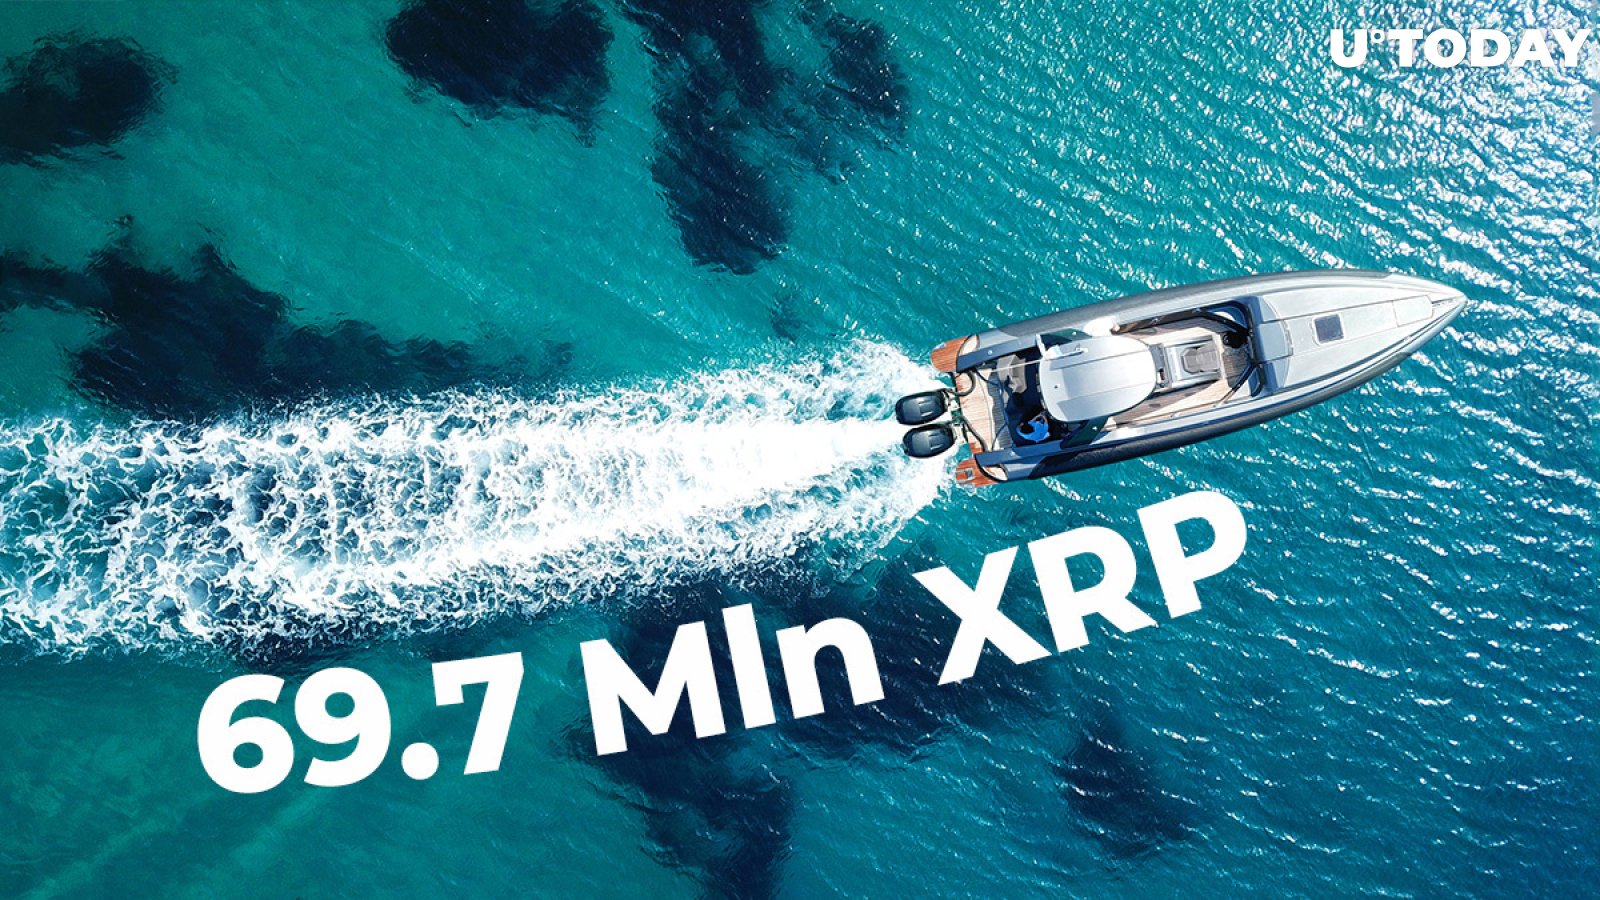 Ripple and Its Largest ODL Corridor Help Move 69.7 Mln XRP